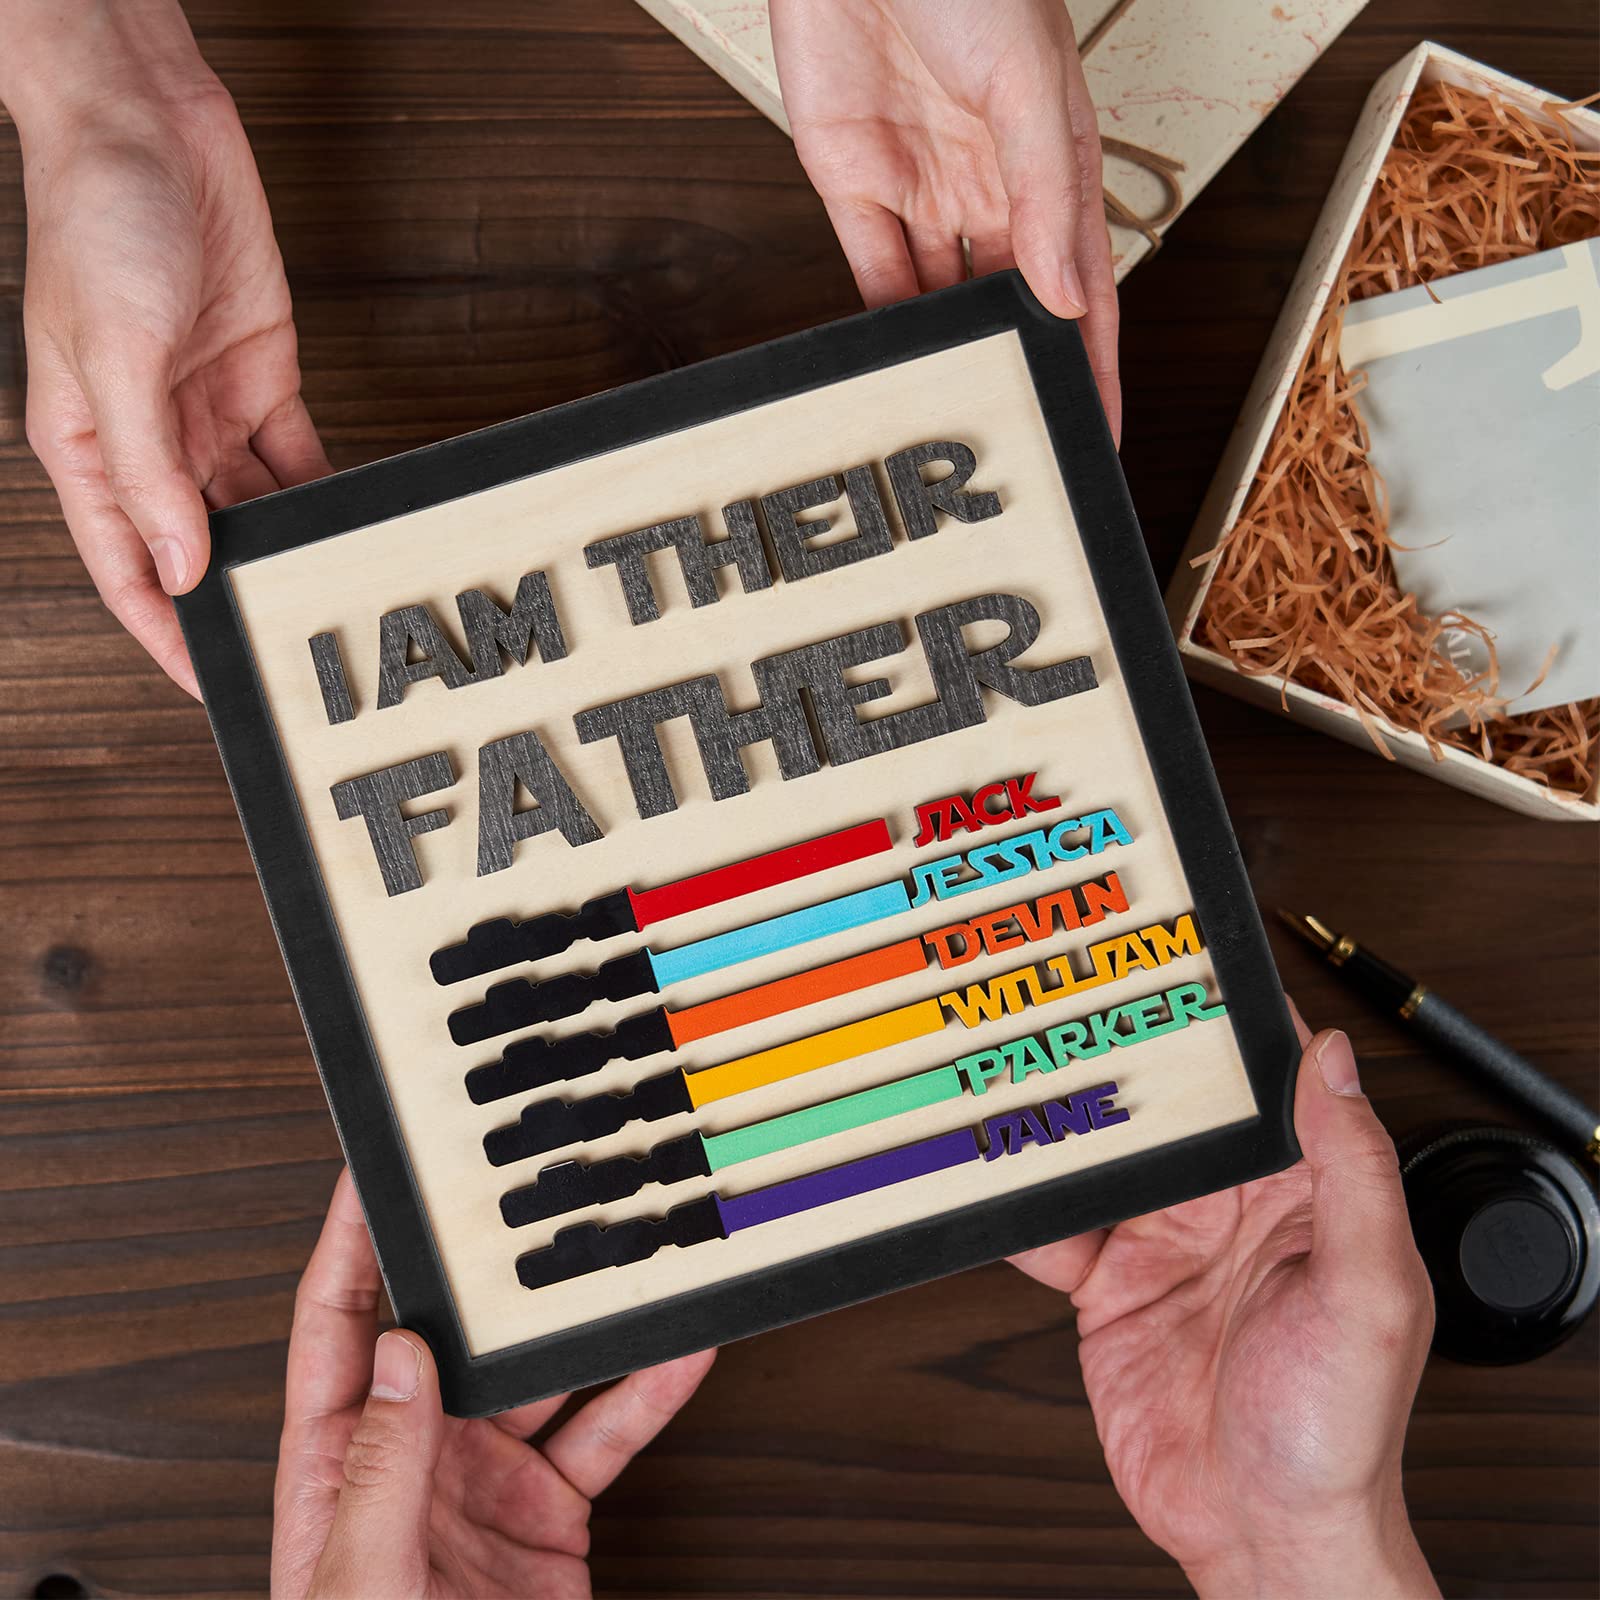 I Am Their Father Engraved Wooden Sign Father's Day Gift